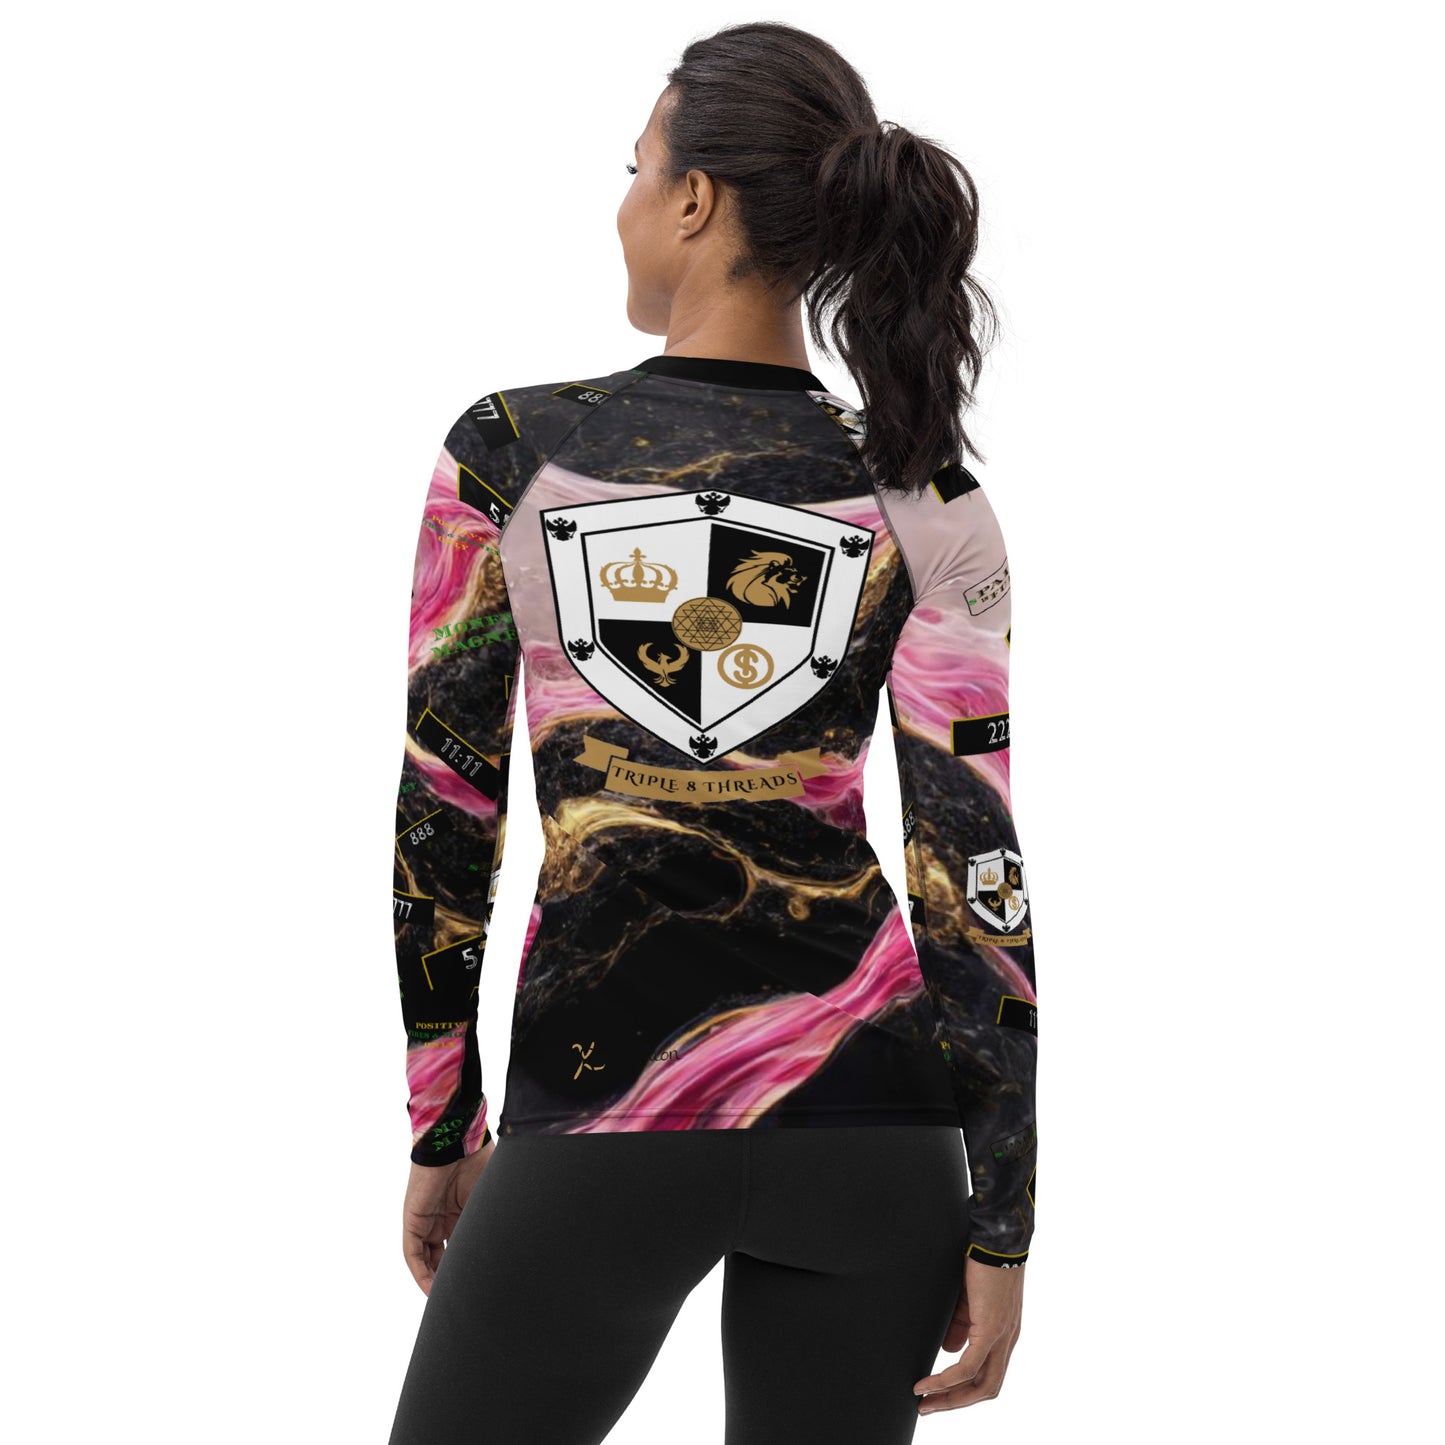 8xquiZit Collection - Women's Manifestation Pynk, Black, N Gold Marble Long Sleeve Activewear